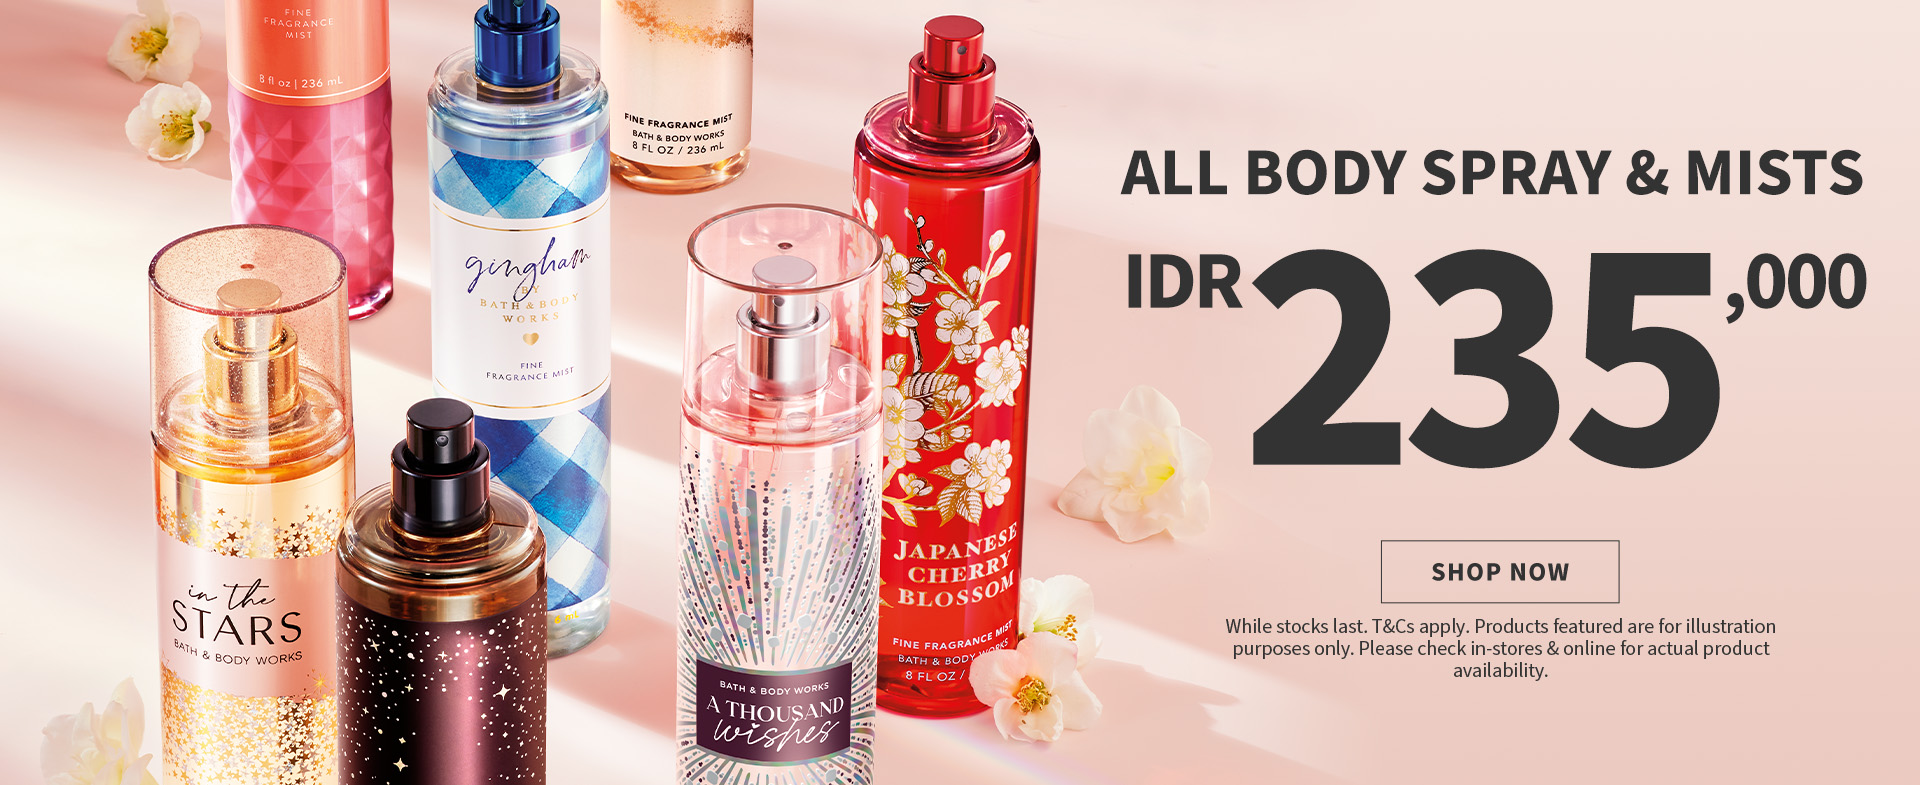 All Body Spray And Mists